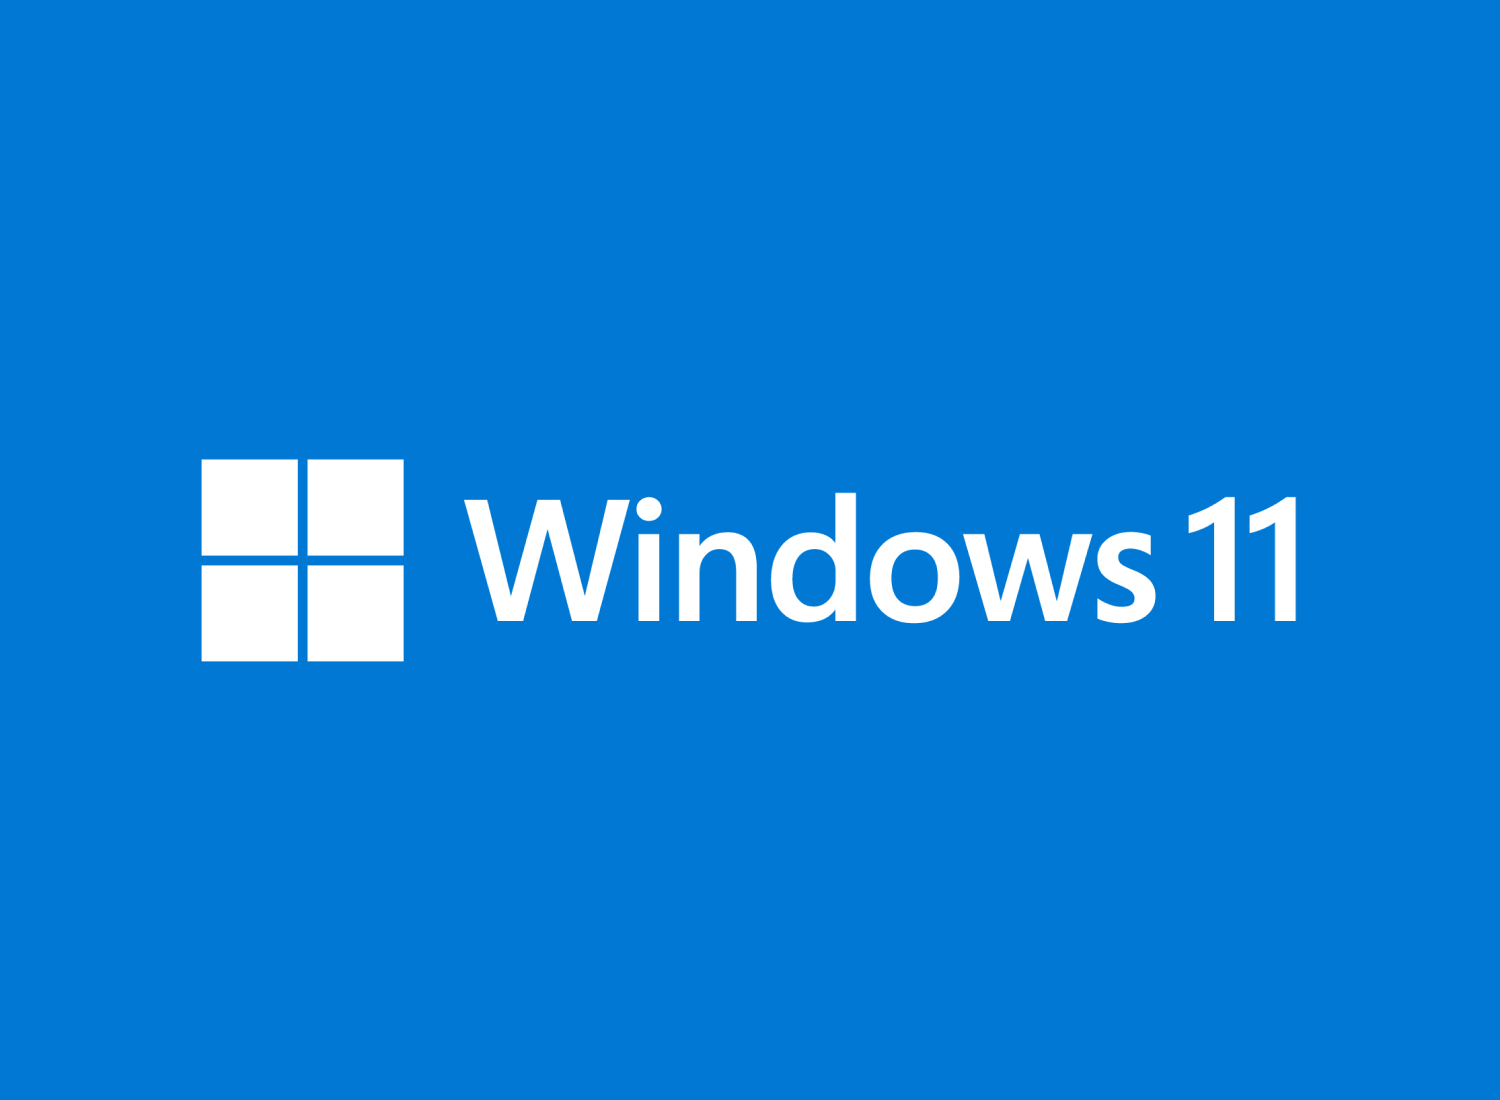 Announcing Windows 11 Insider Preview Build 22621